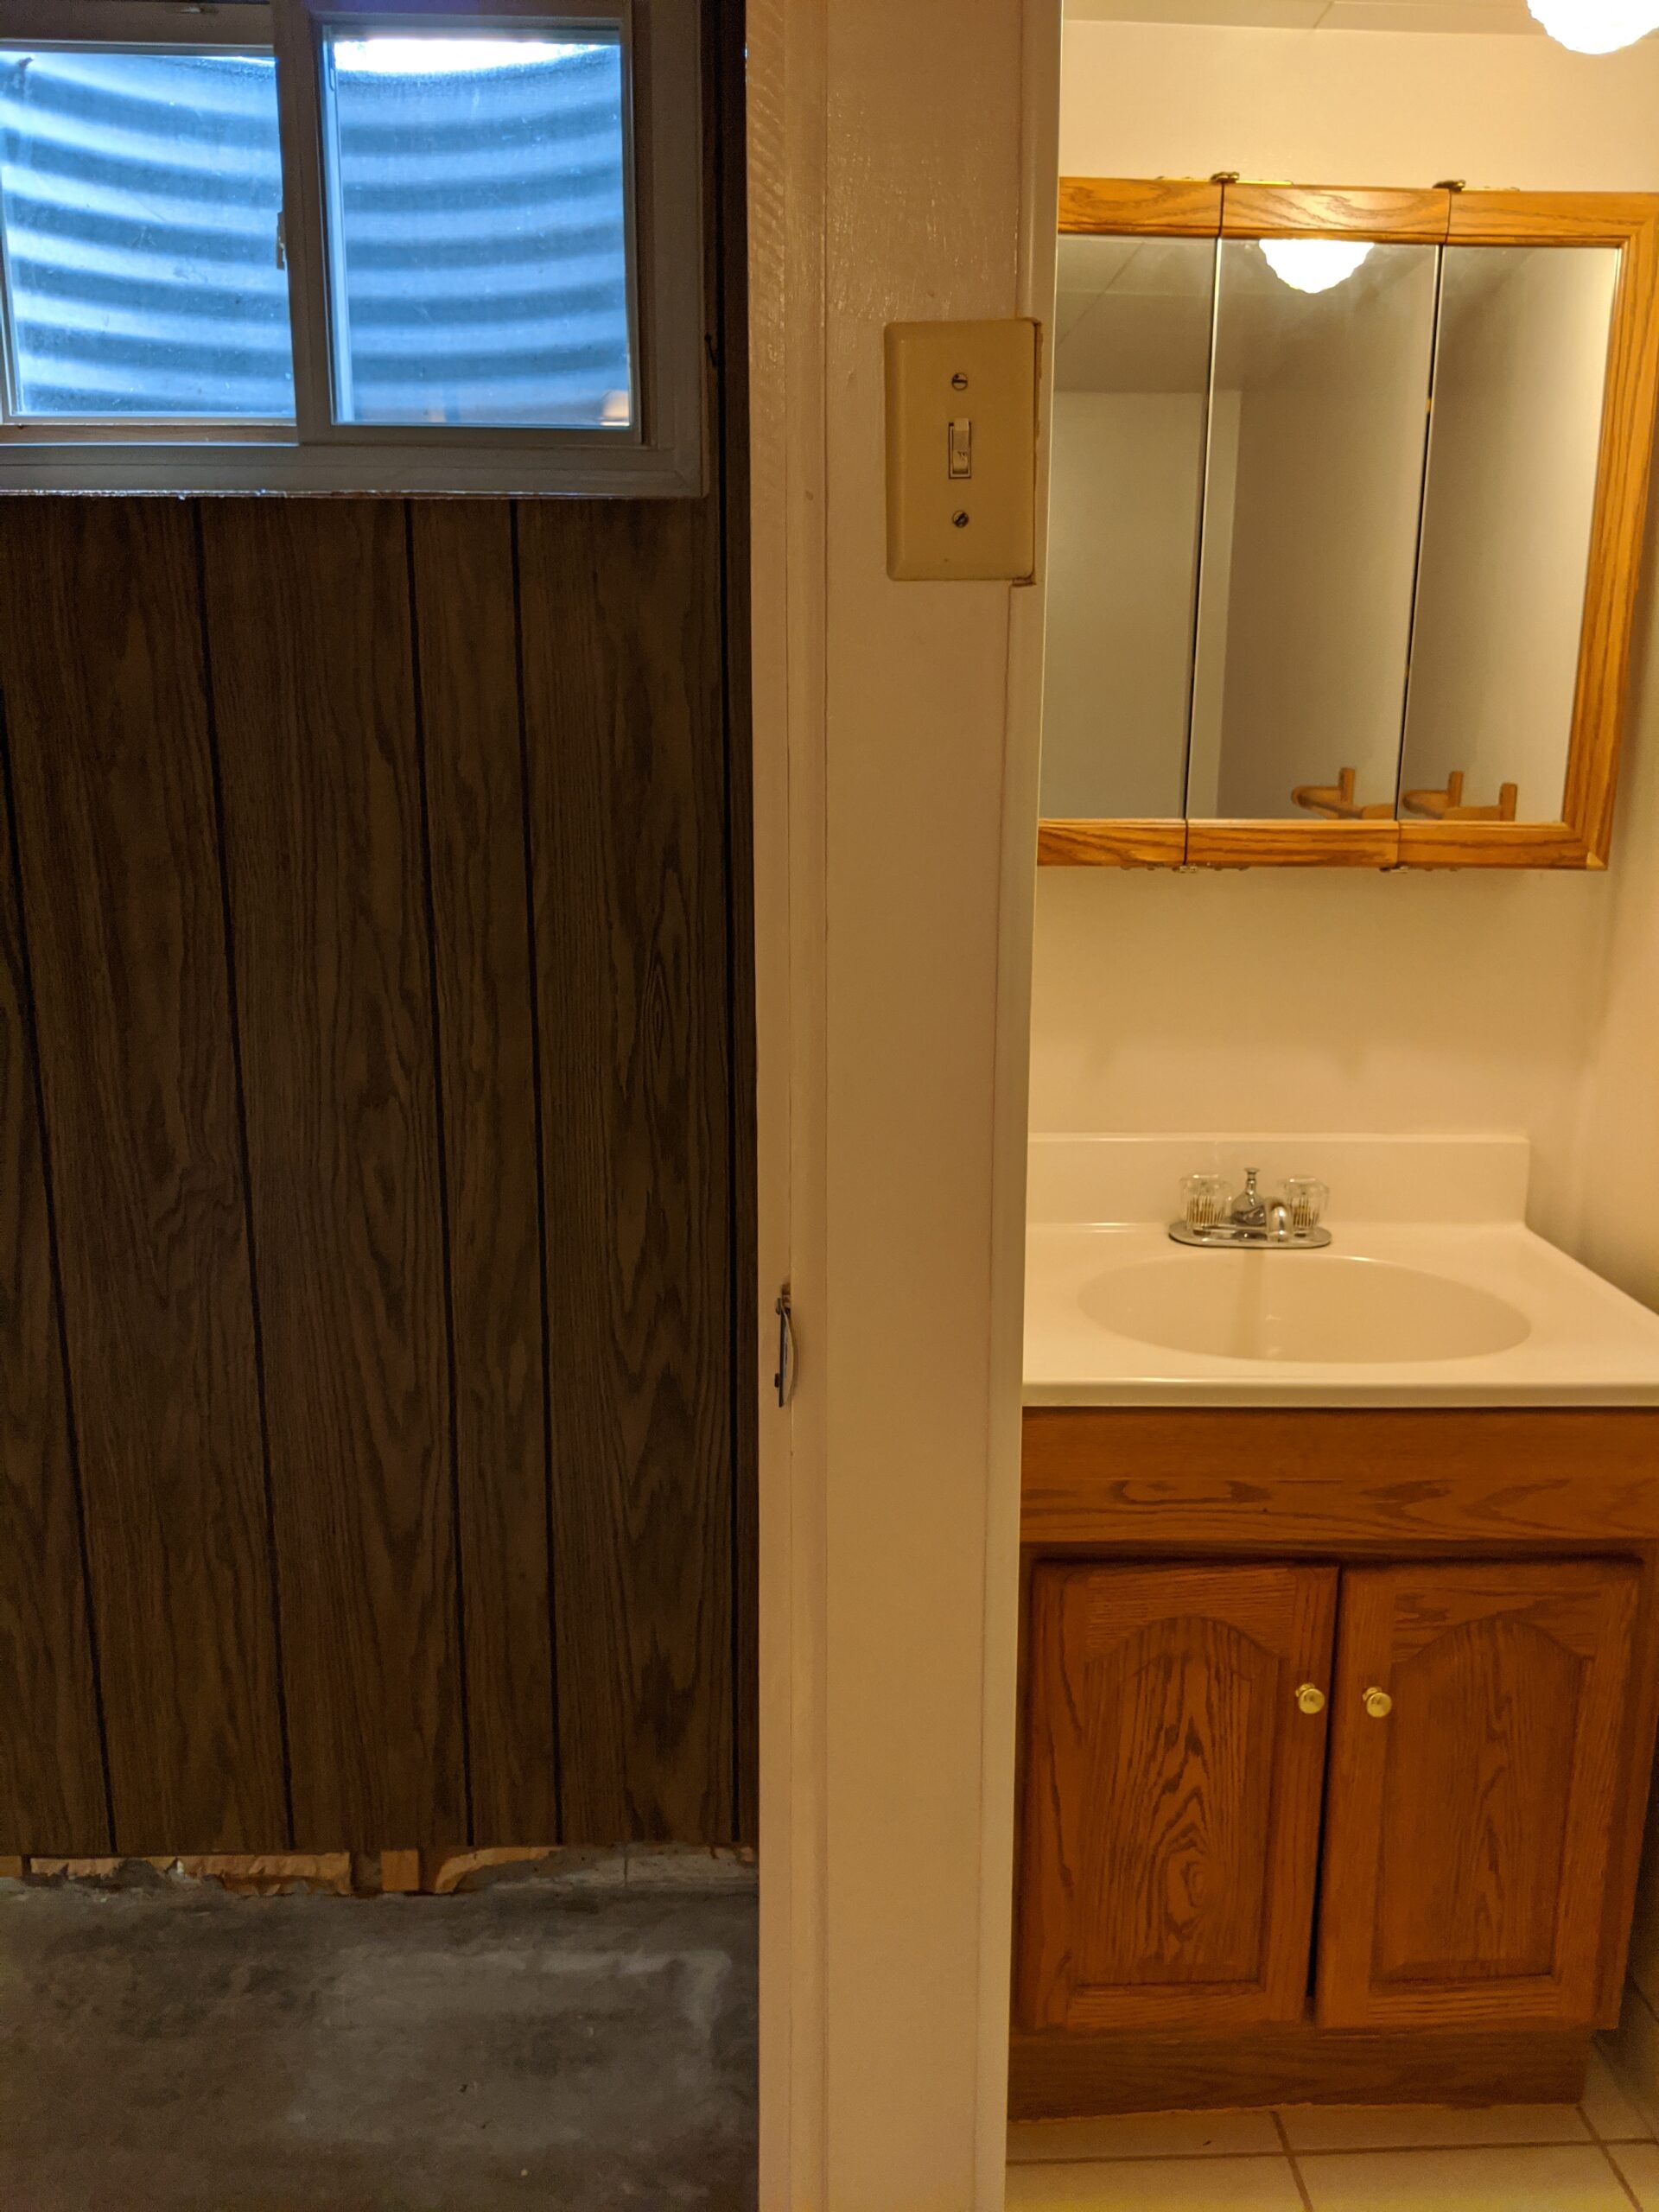 The home inspector identified a few code violations, like no exhaust fan or window inside the basement bathroom and this light switch being too high.